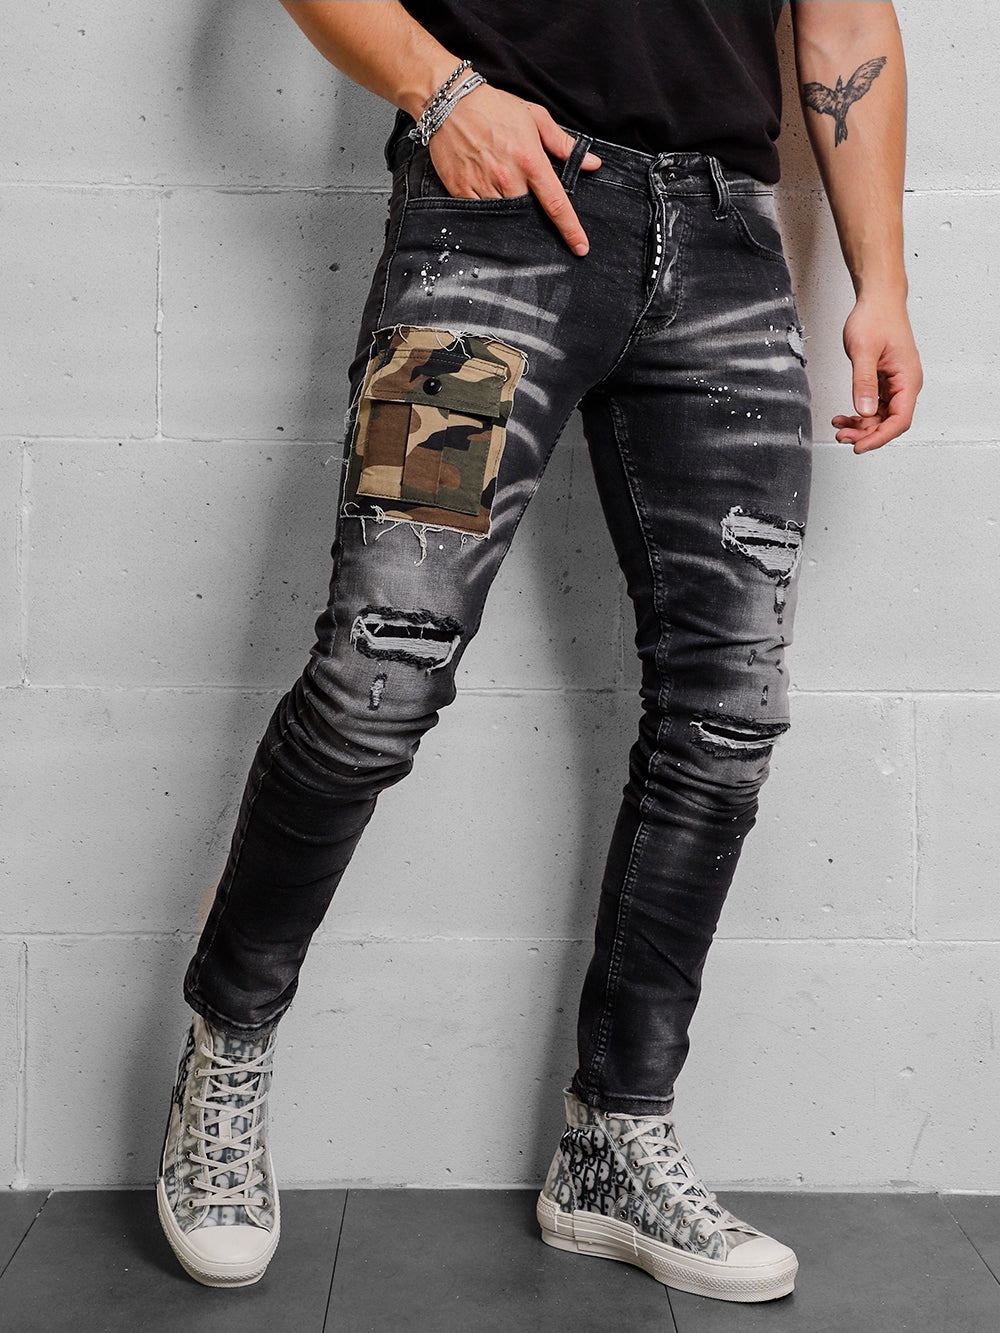 A man wearing ripped jeans and sneakers CAMOUFLAGE | BLACK leaning against a wall.